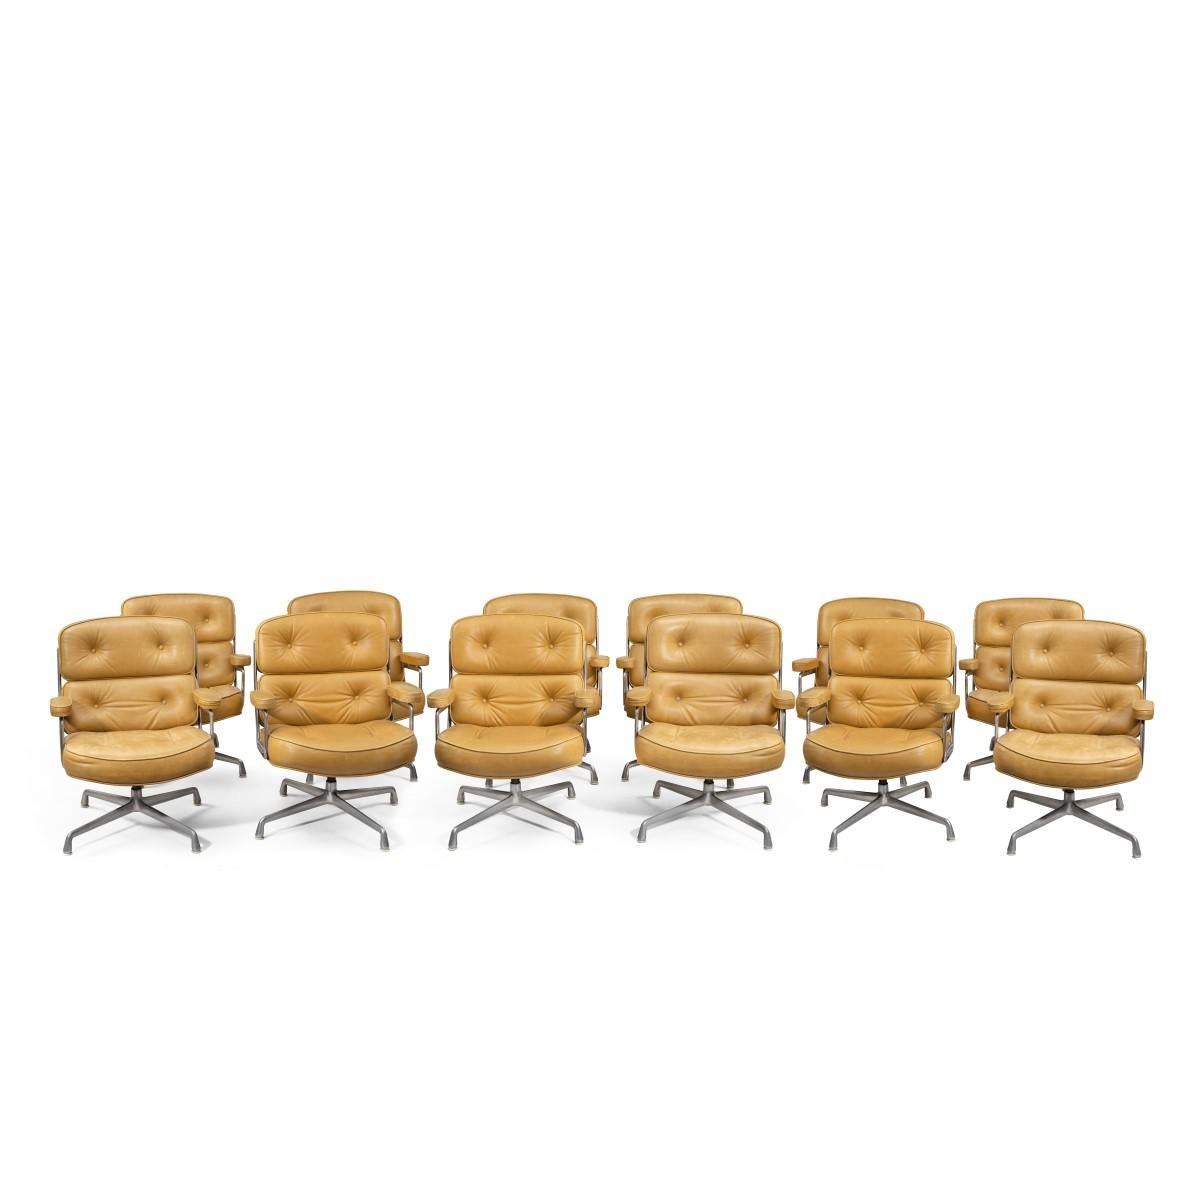 Aluminum Set of Twelve Swivel “Time Life Chairs” Designed by Charles & Ray Eames